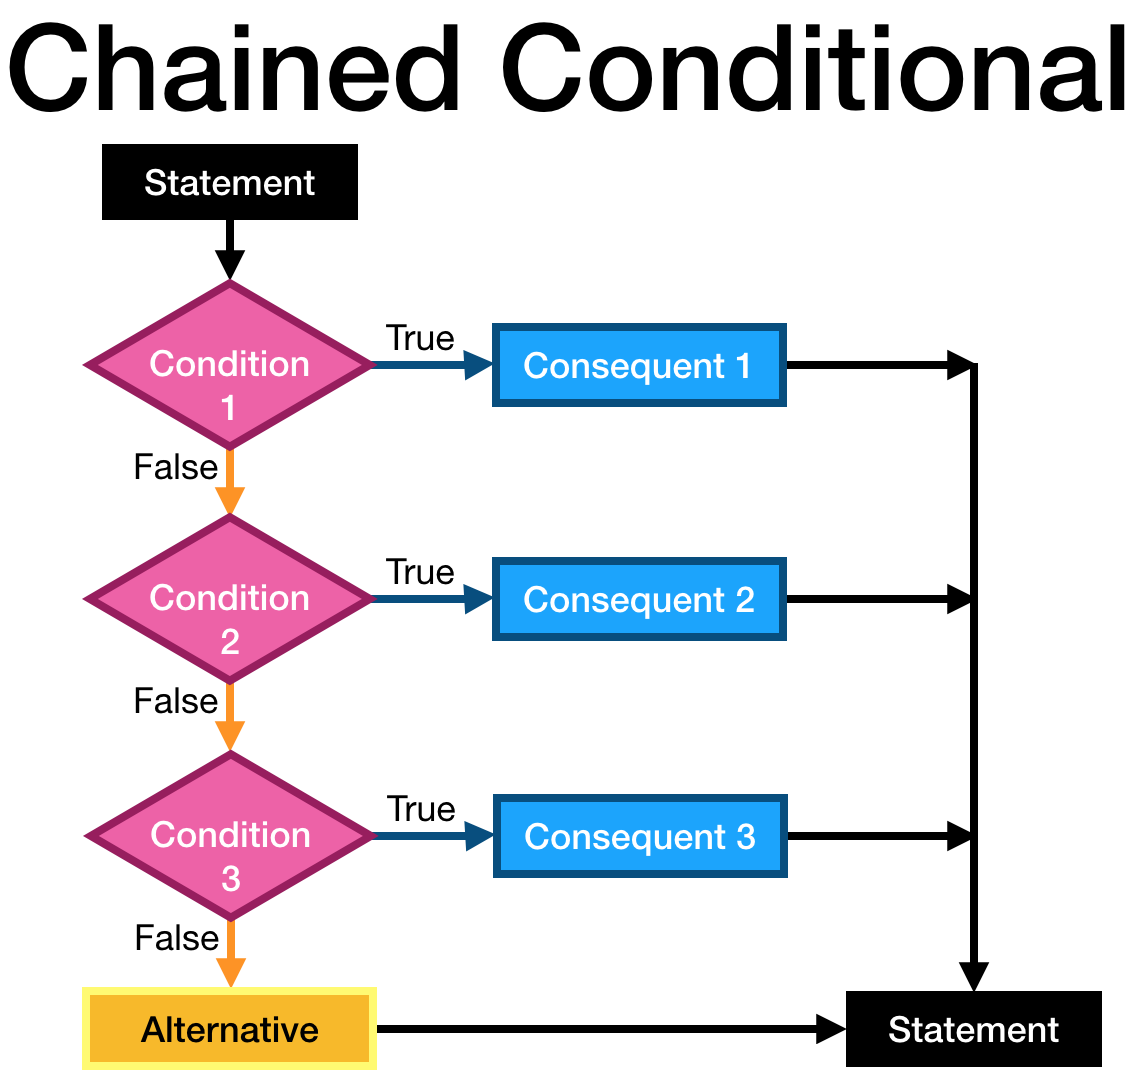 Chained Conditional Flowchart.png